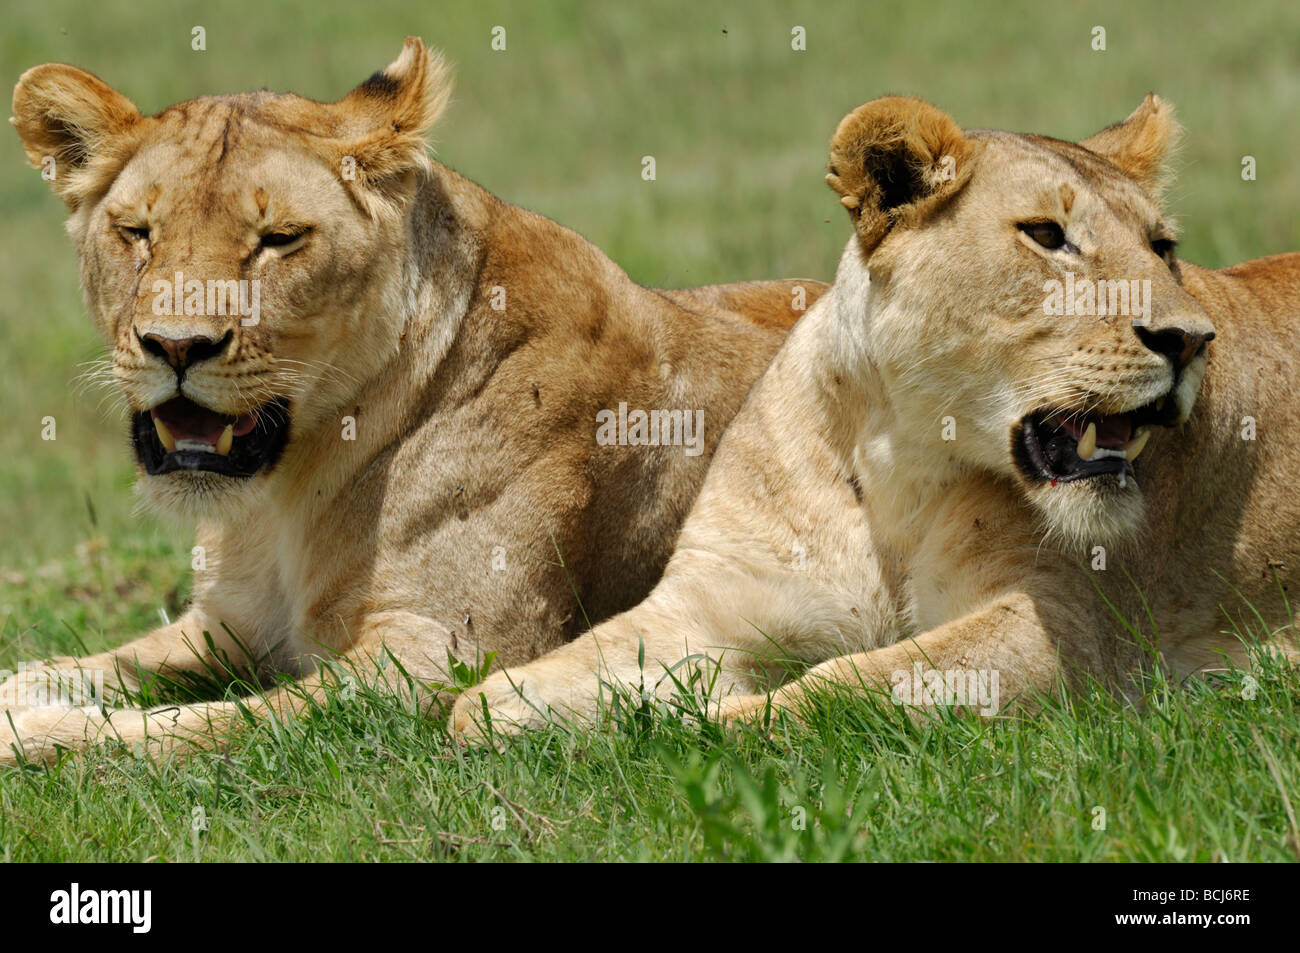 Stock photo of lion siblings resting together, Serengeti National Park, Tanzania, February 2009. Stock Photo